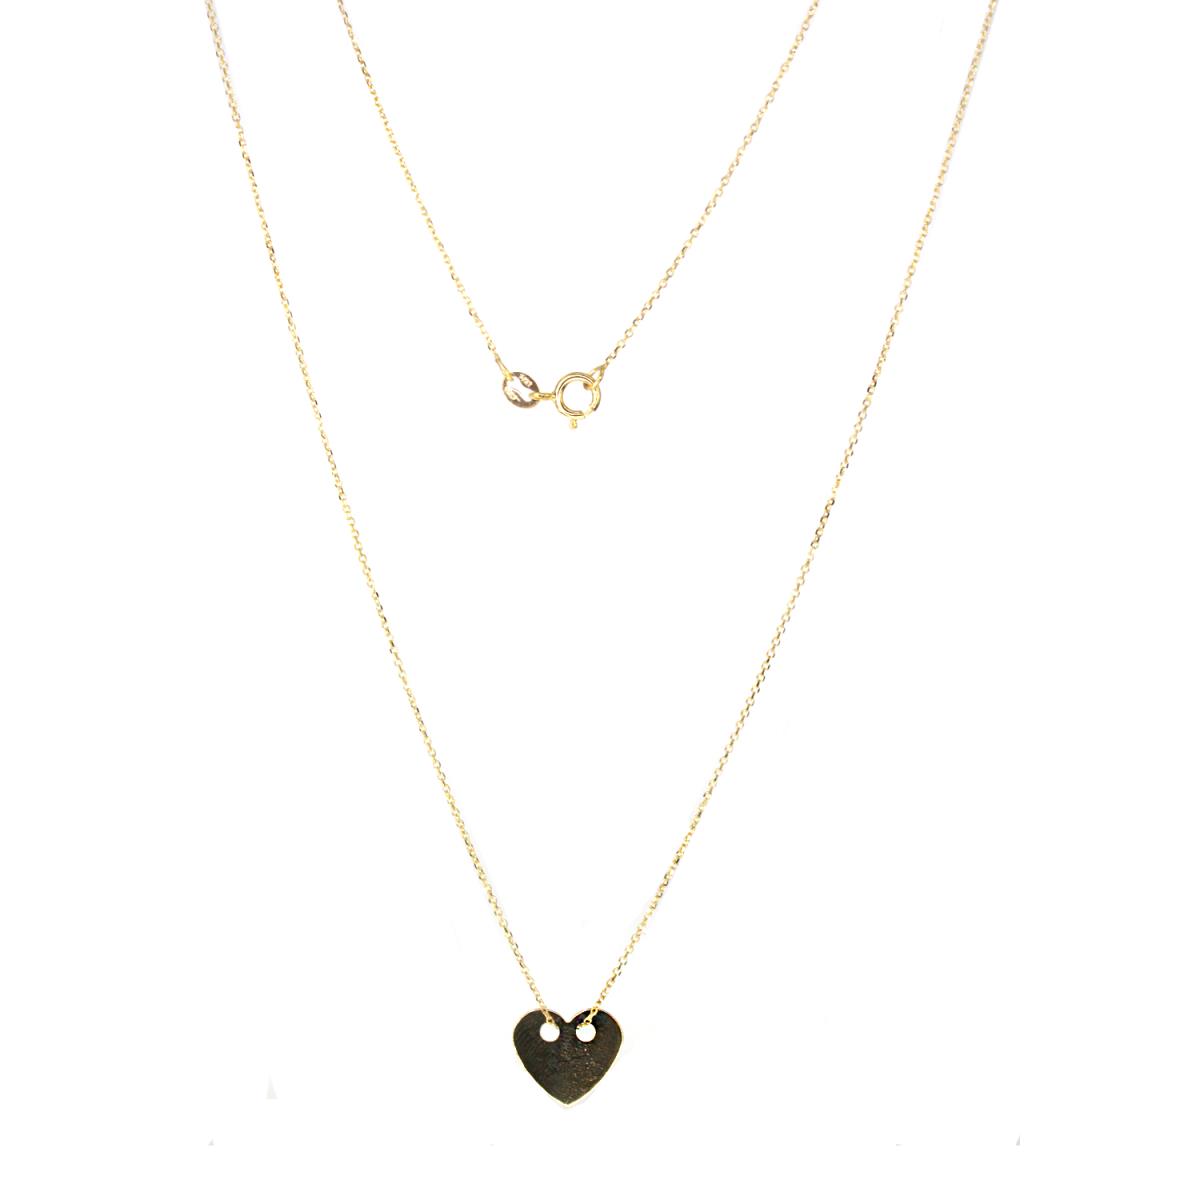 14K Yellow Gold Polished Heart Charm 17"+2" Necklace